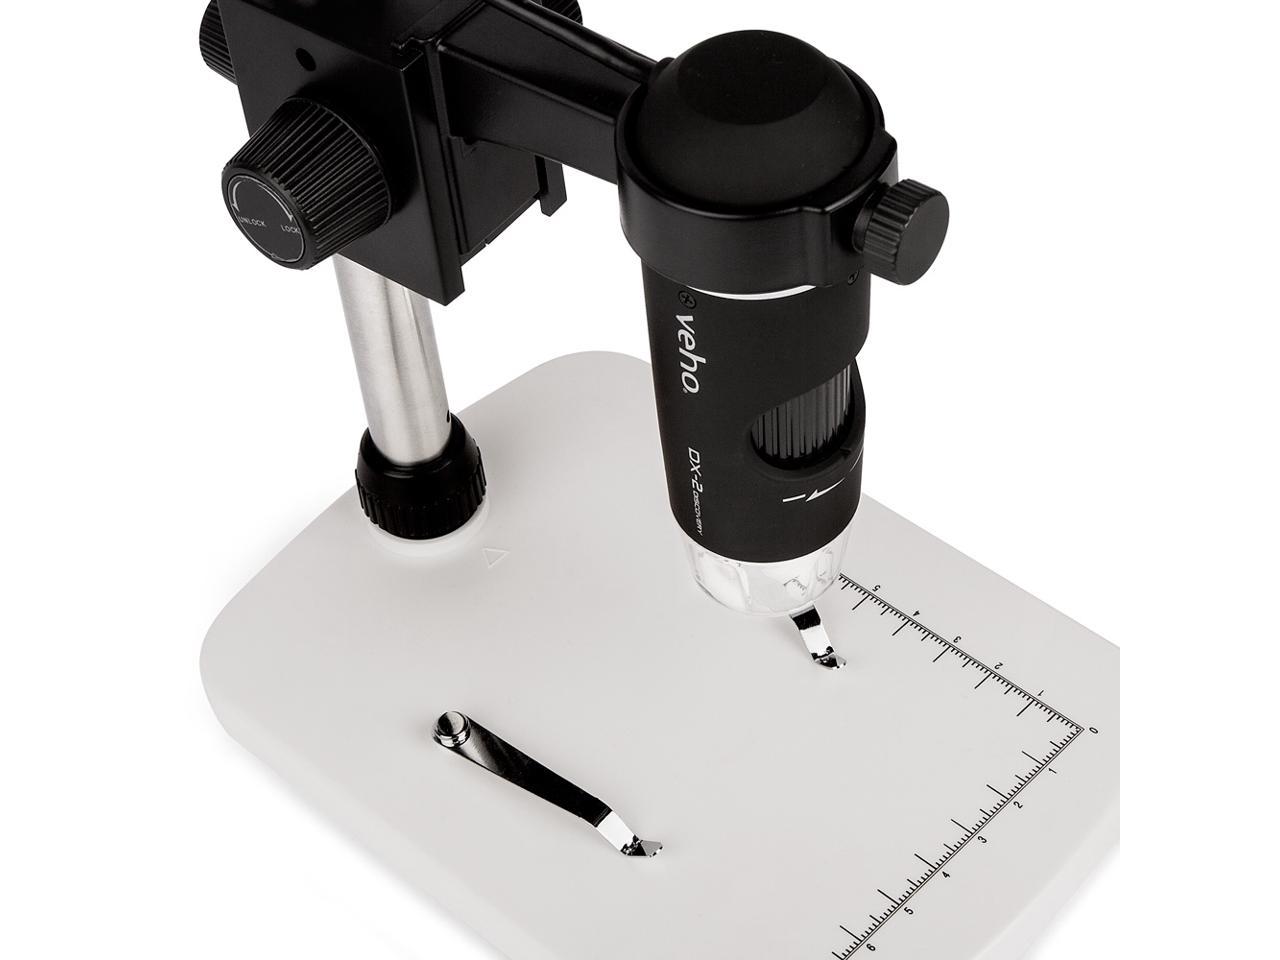 Veho Discovery DX-2 USB Digital Microscope | 5 Mega Pixels | x300 Magnification | Photo/Video Capture & Recording | Up to 2592 x 1944 Resolution | 8 LED's | Adjustable stand (VMS-007-DX2)